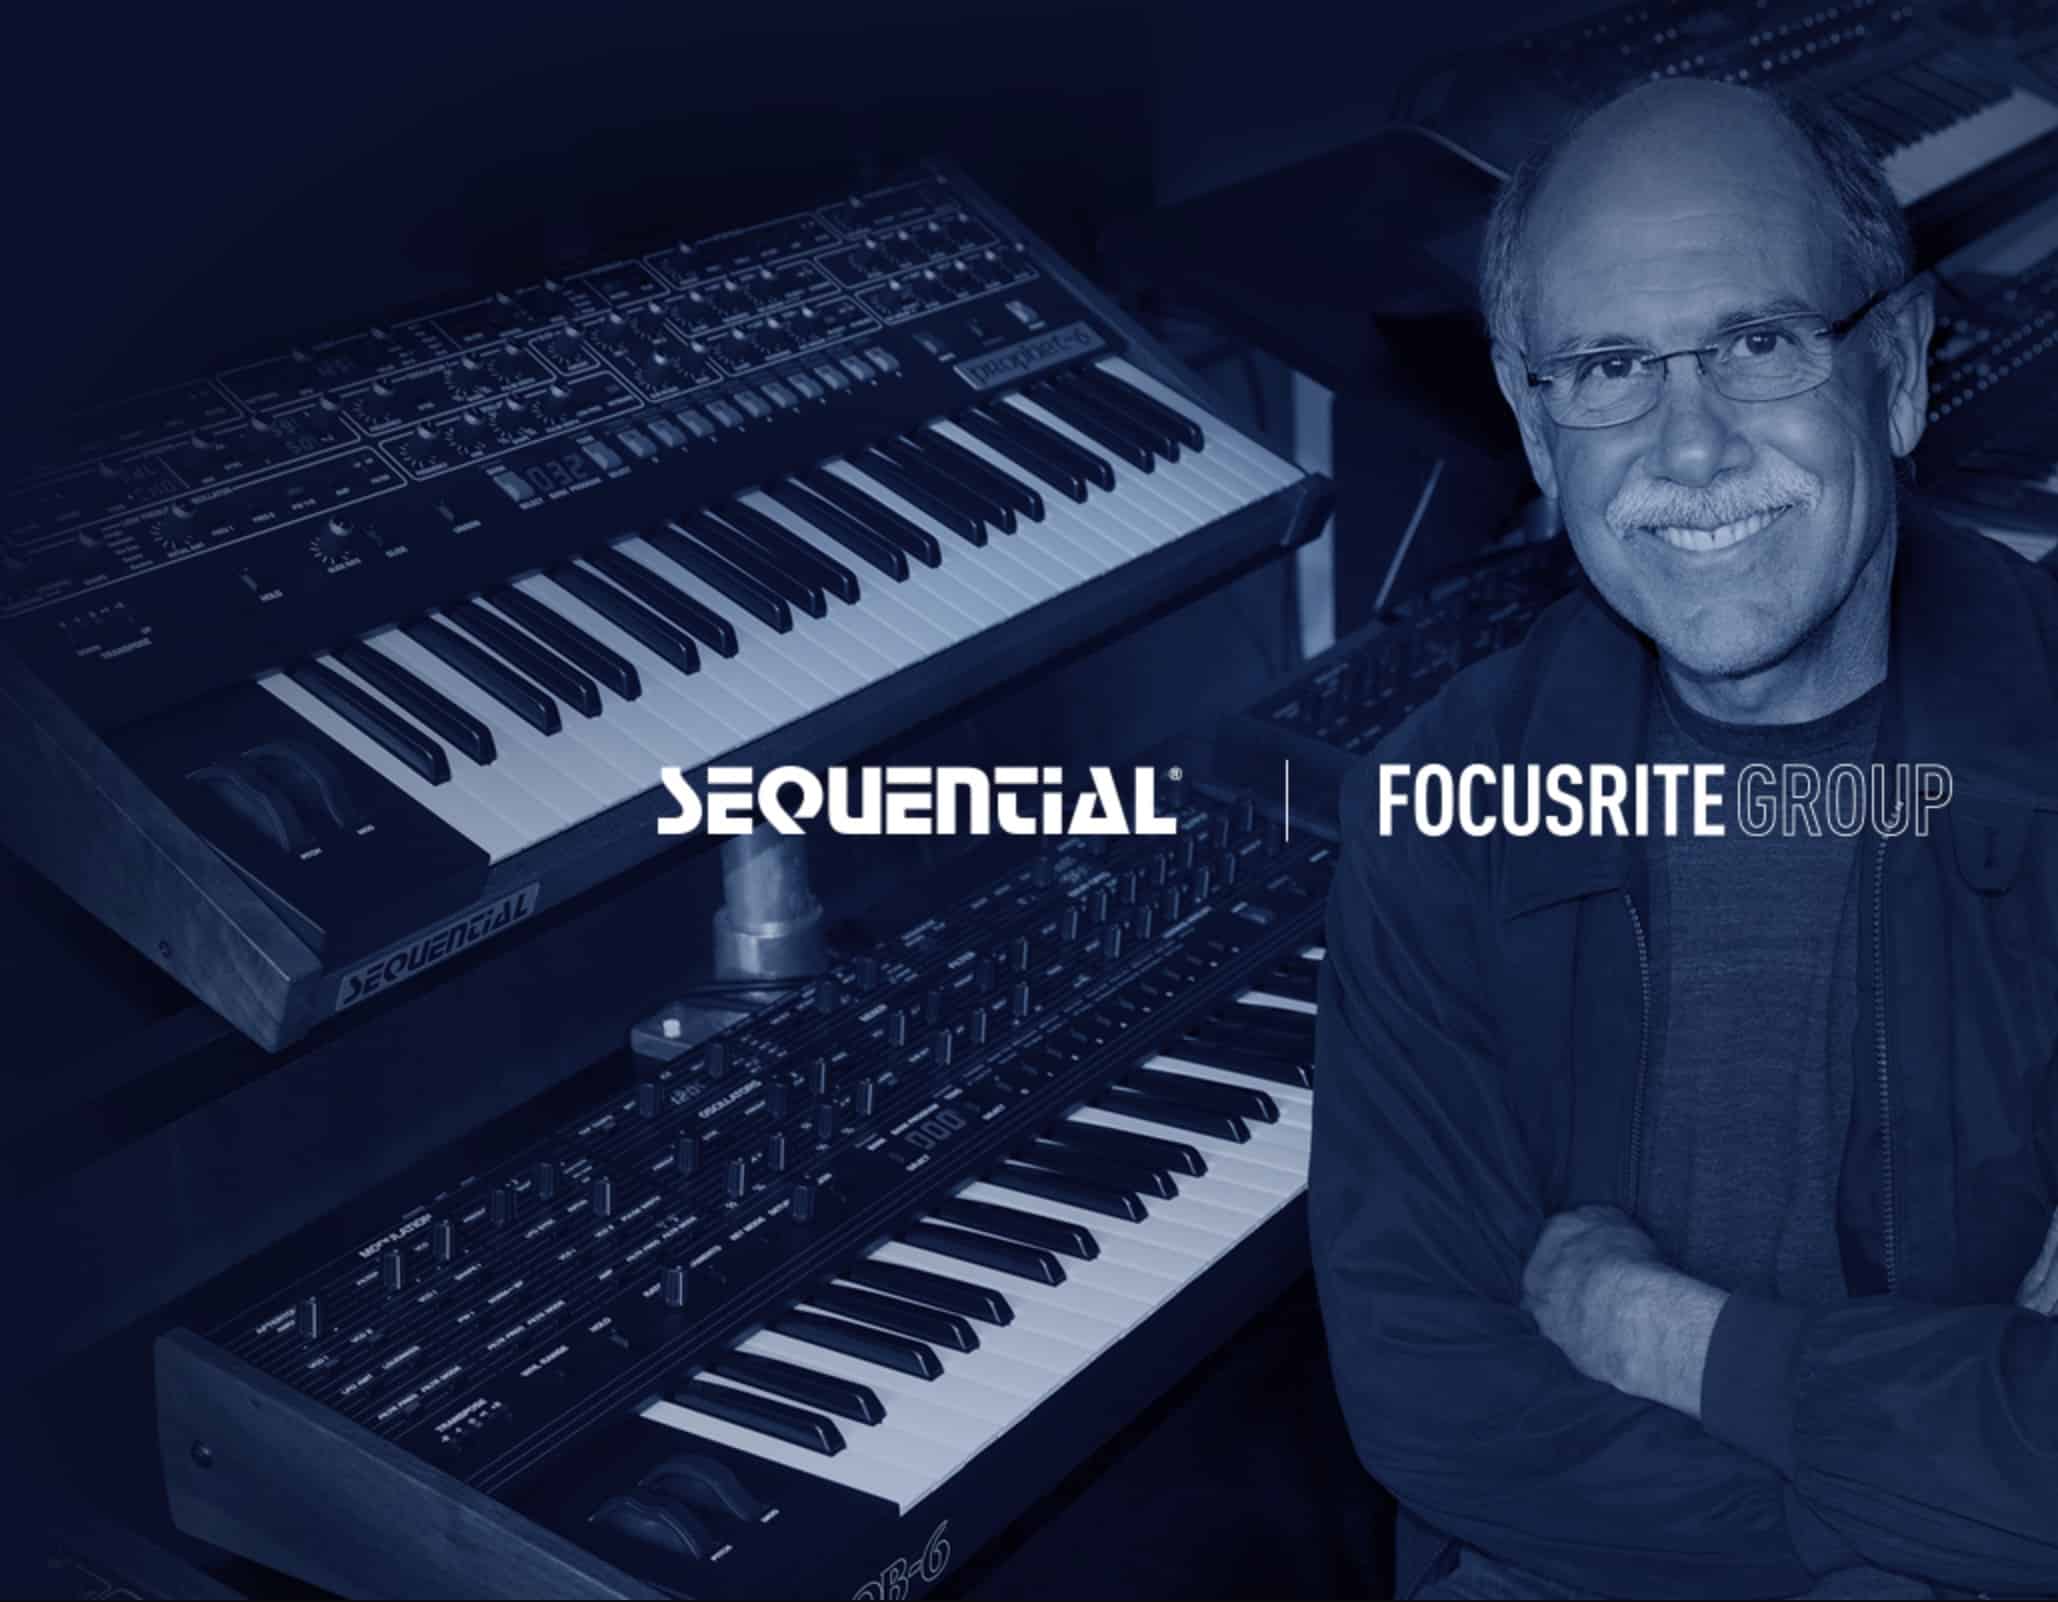 Focusrite Group Acquires Legendary Synth Brand by Iconic Dave Smith